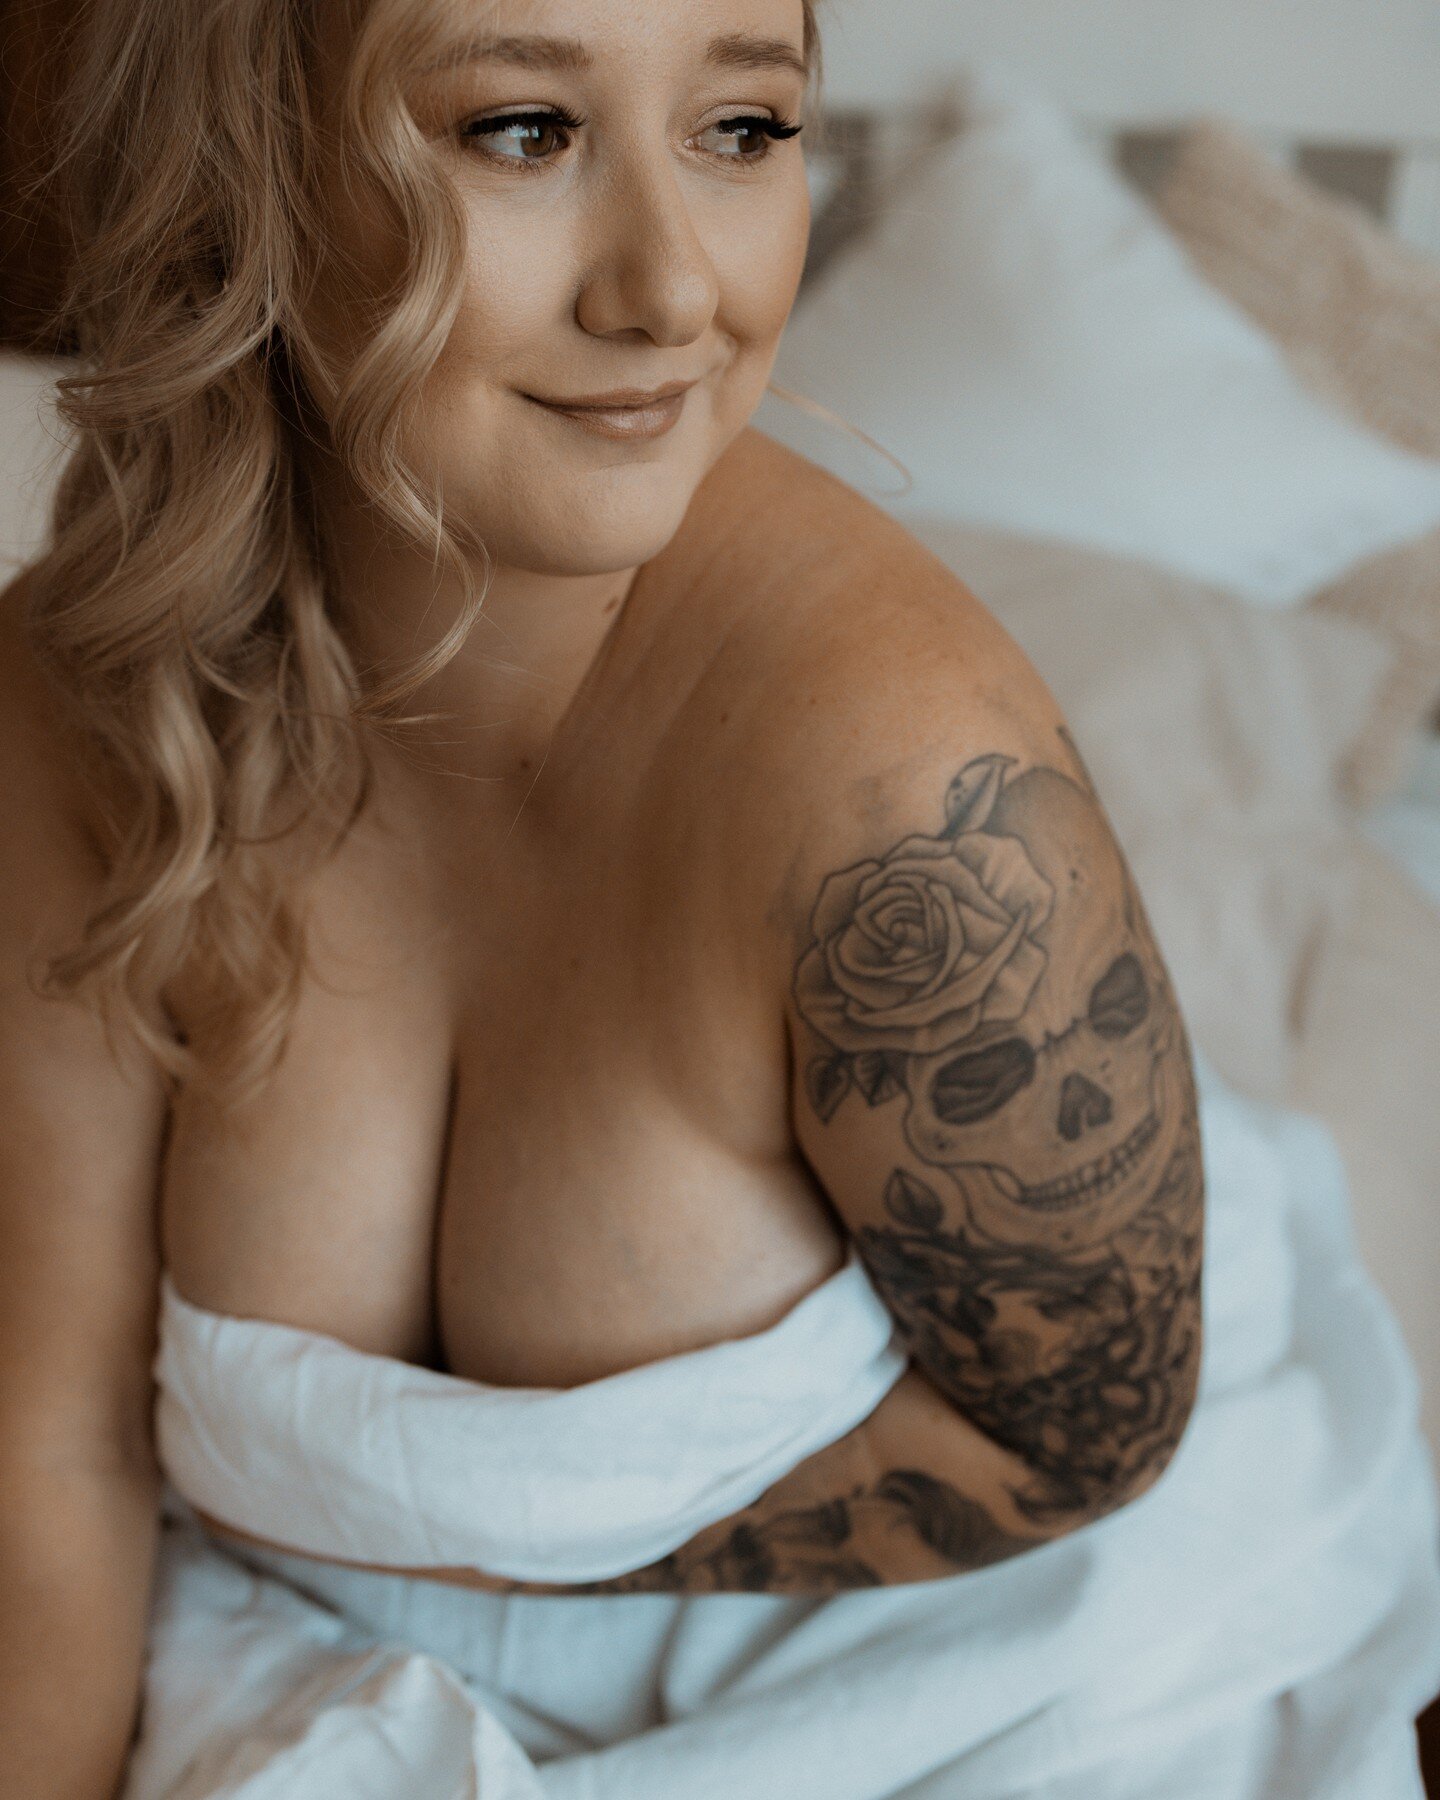 &ldquo;One thing that resilient people have in common is that they understand who they are and they don&rsquo;t trying to be like other people.&rdquo; 
-Brene Brown

#elkandfirboudoir #elkandfir #leluxeboudoir #brisbaneboudoir #brisbaneboudoirstudio 